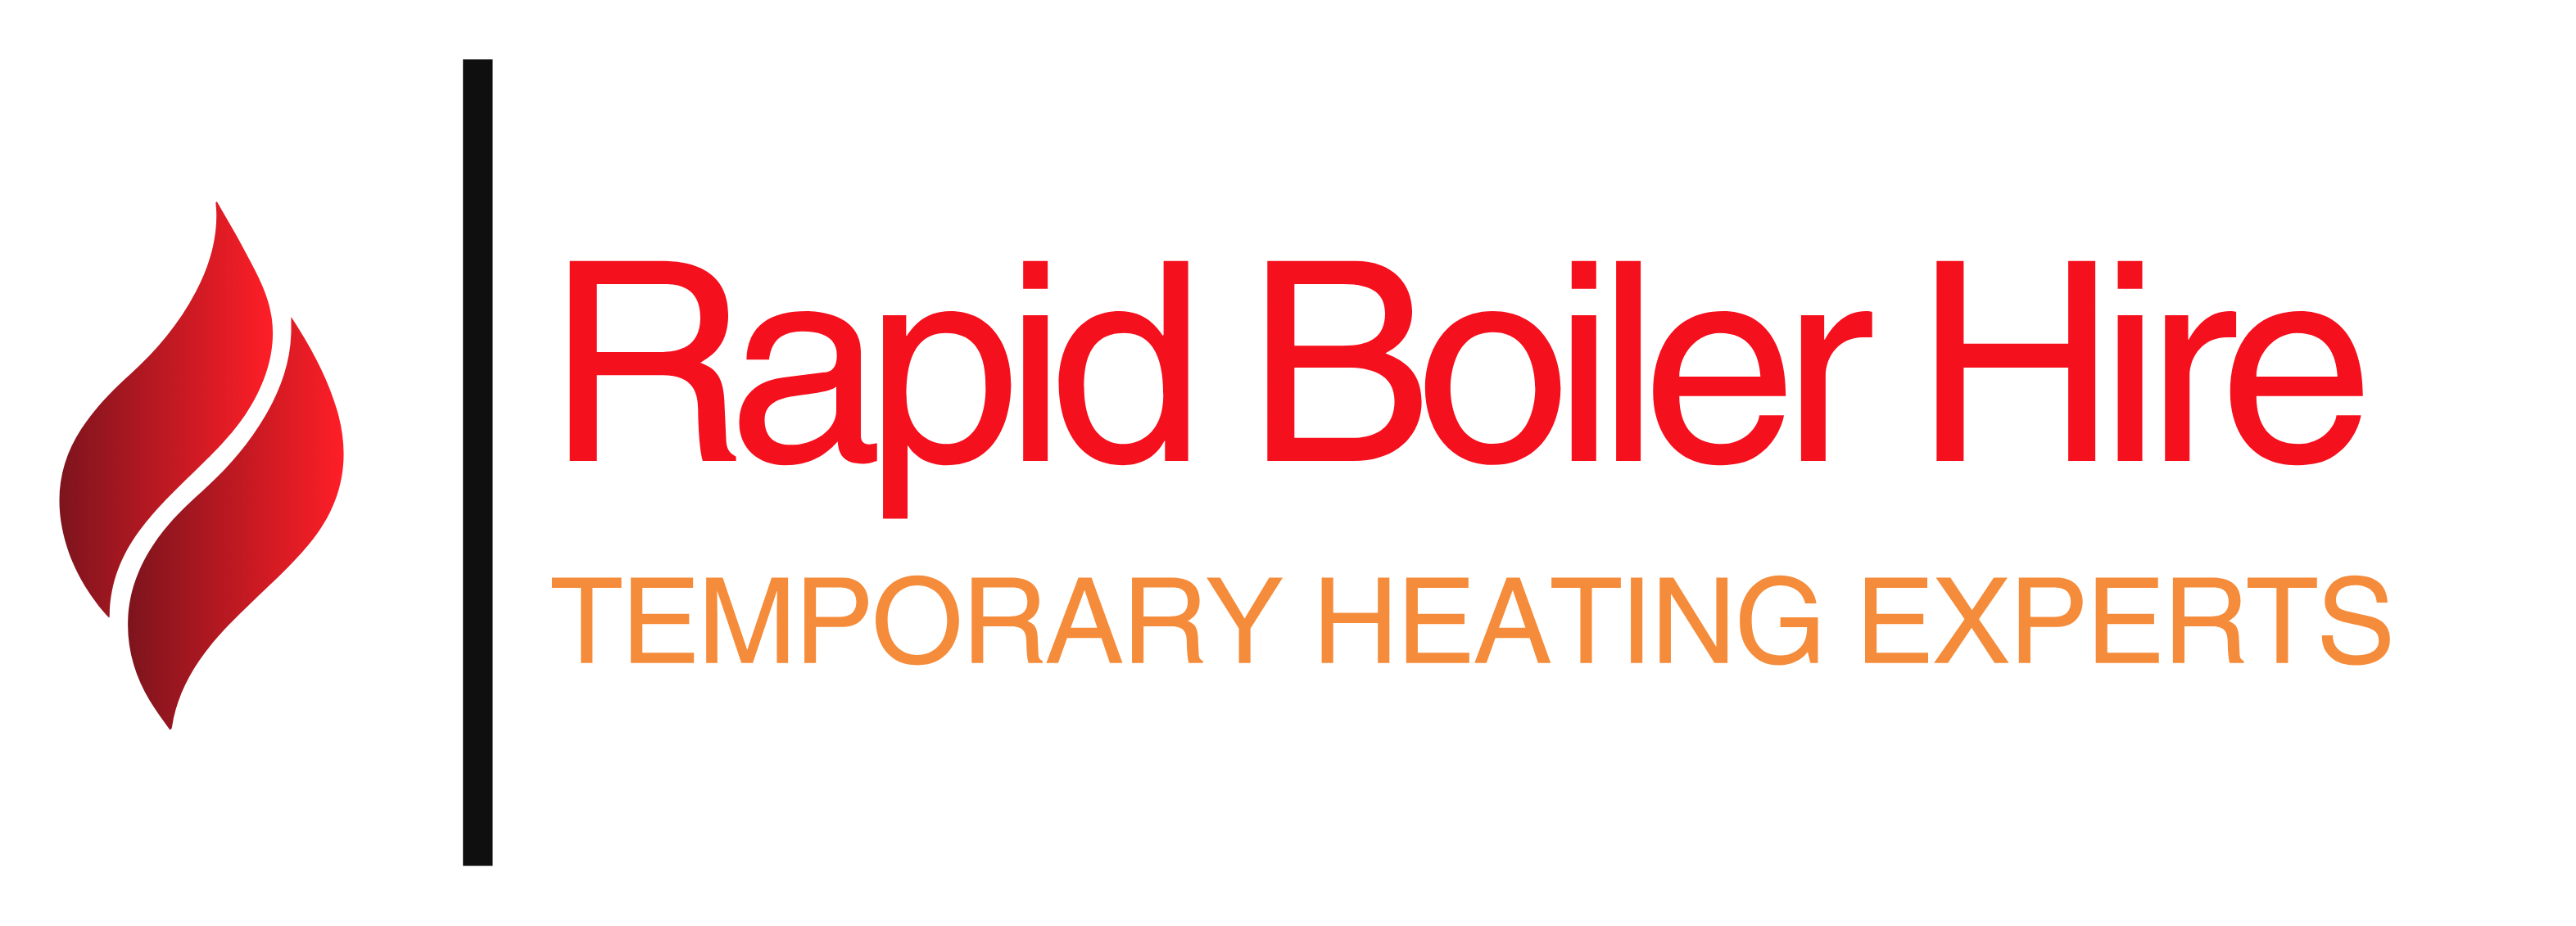 Company Rapid Boiler Hire Limited. Description and contact information.